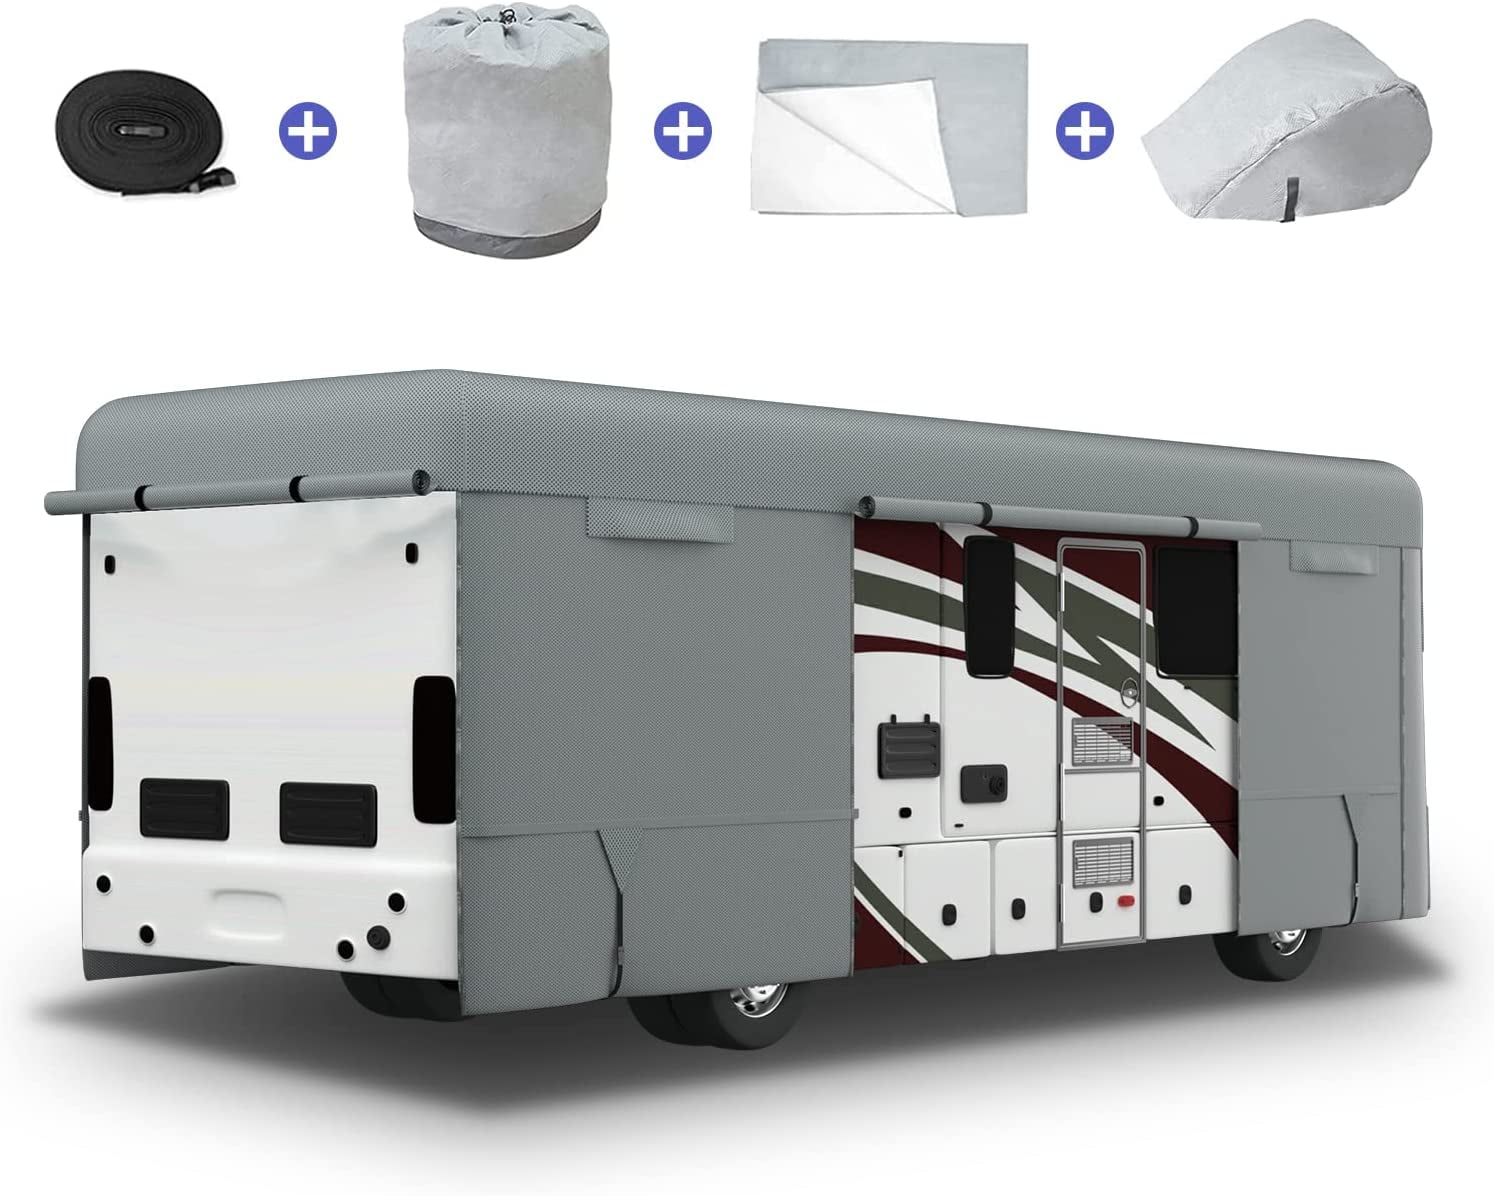 Umbrauto Class A Motorhome Cover Anti-UV Top Upgraded Dupont Tyvek Material Heavy Duty Camper Trailer Covers Durable Breathable Waterproof Quick Drying with Adhesive Repair Patch Gray/White 